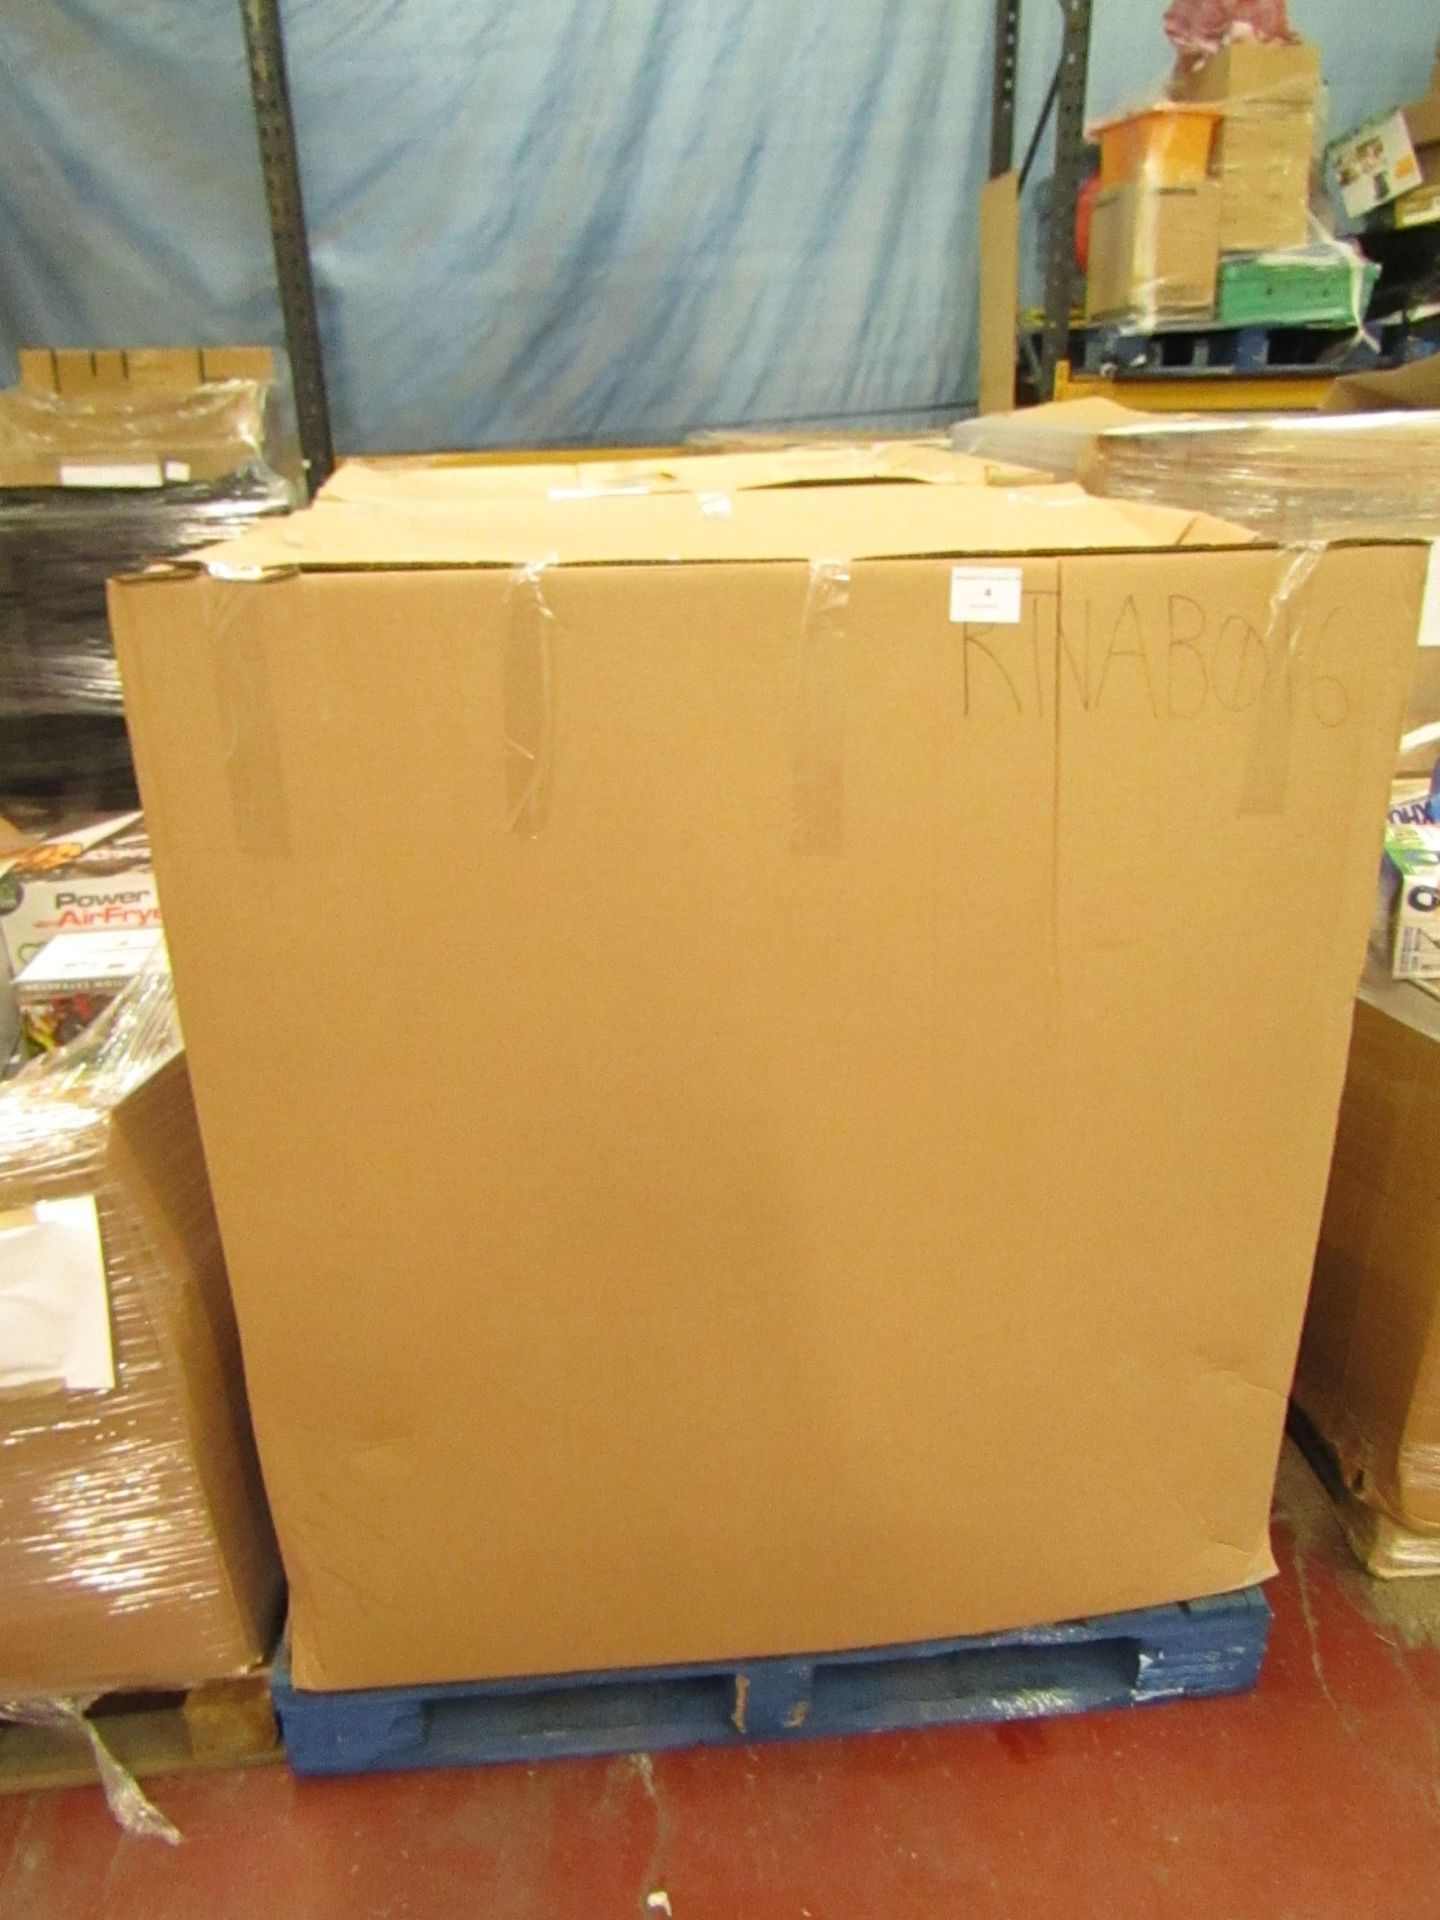 |APPROX 15X | THE PALLET CONTAINS MAXI GLIDERS, WONDER CORE'S, NUBREEZE DRYERS AND MORE | BOXED